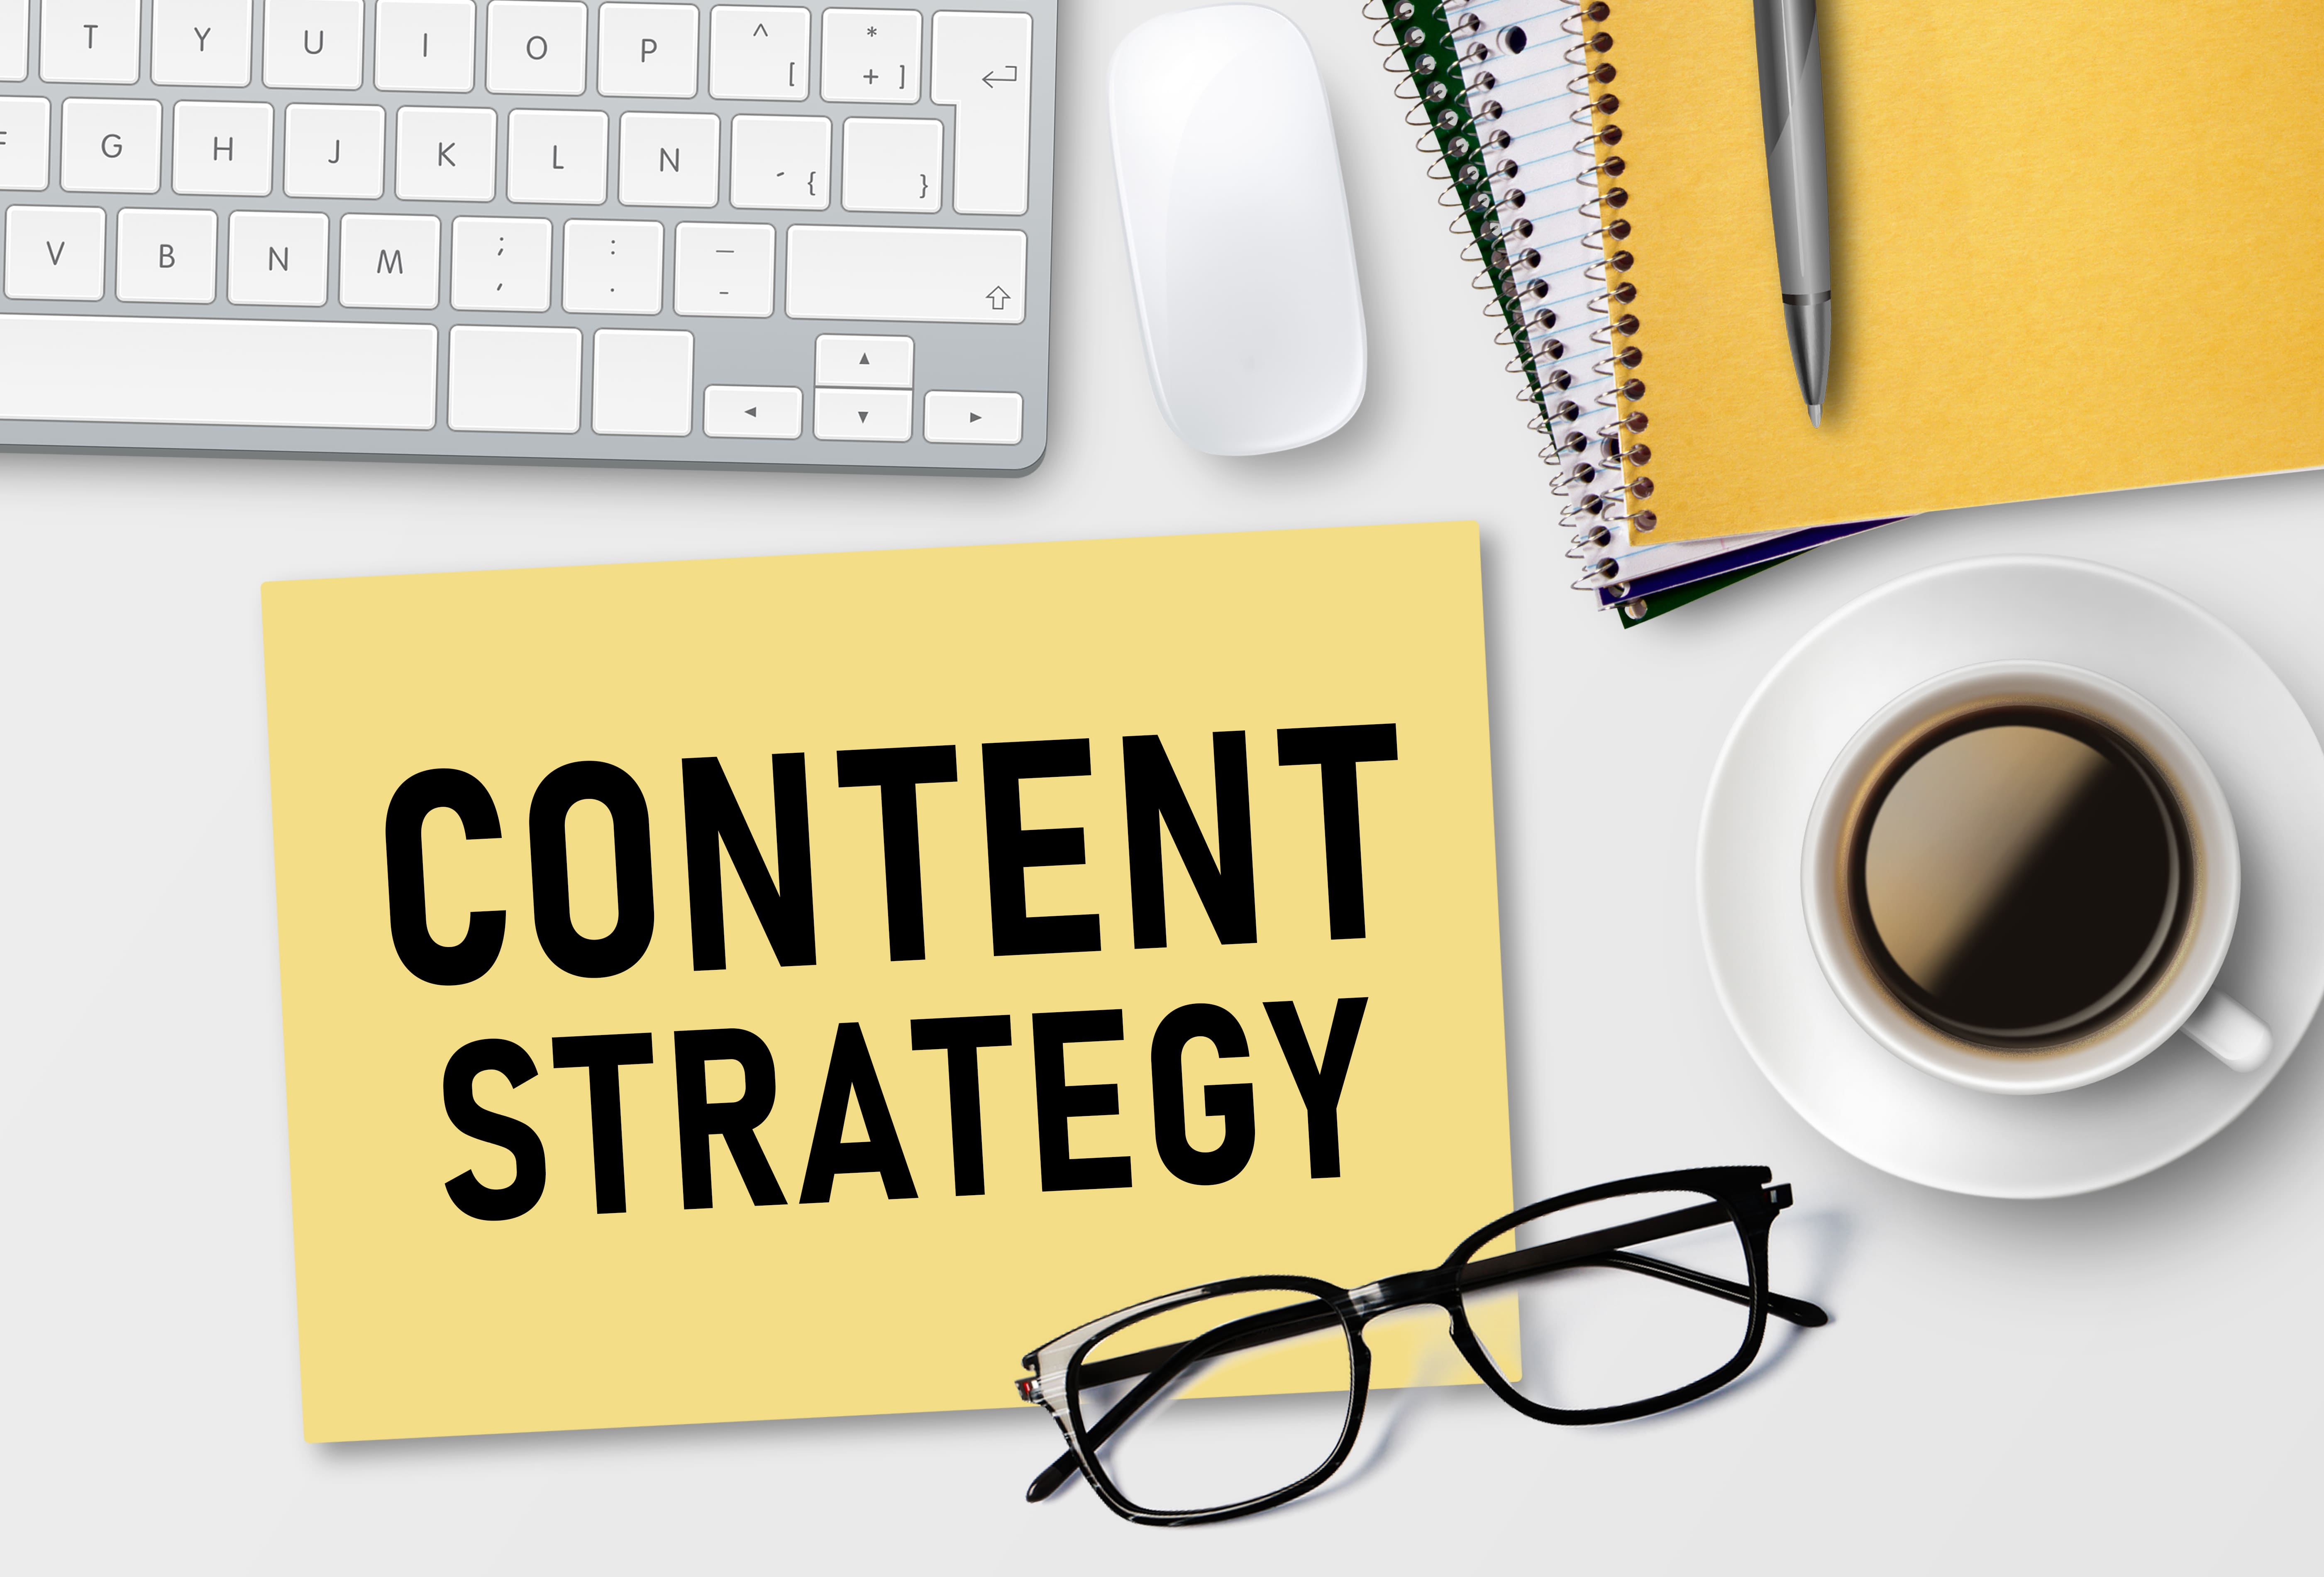 Content Strategy 101: A Practical Guide For Beginners